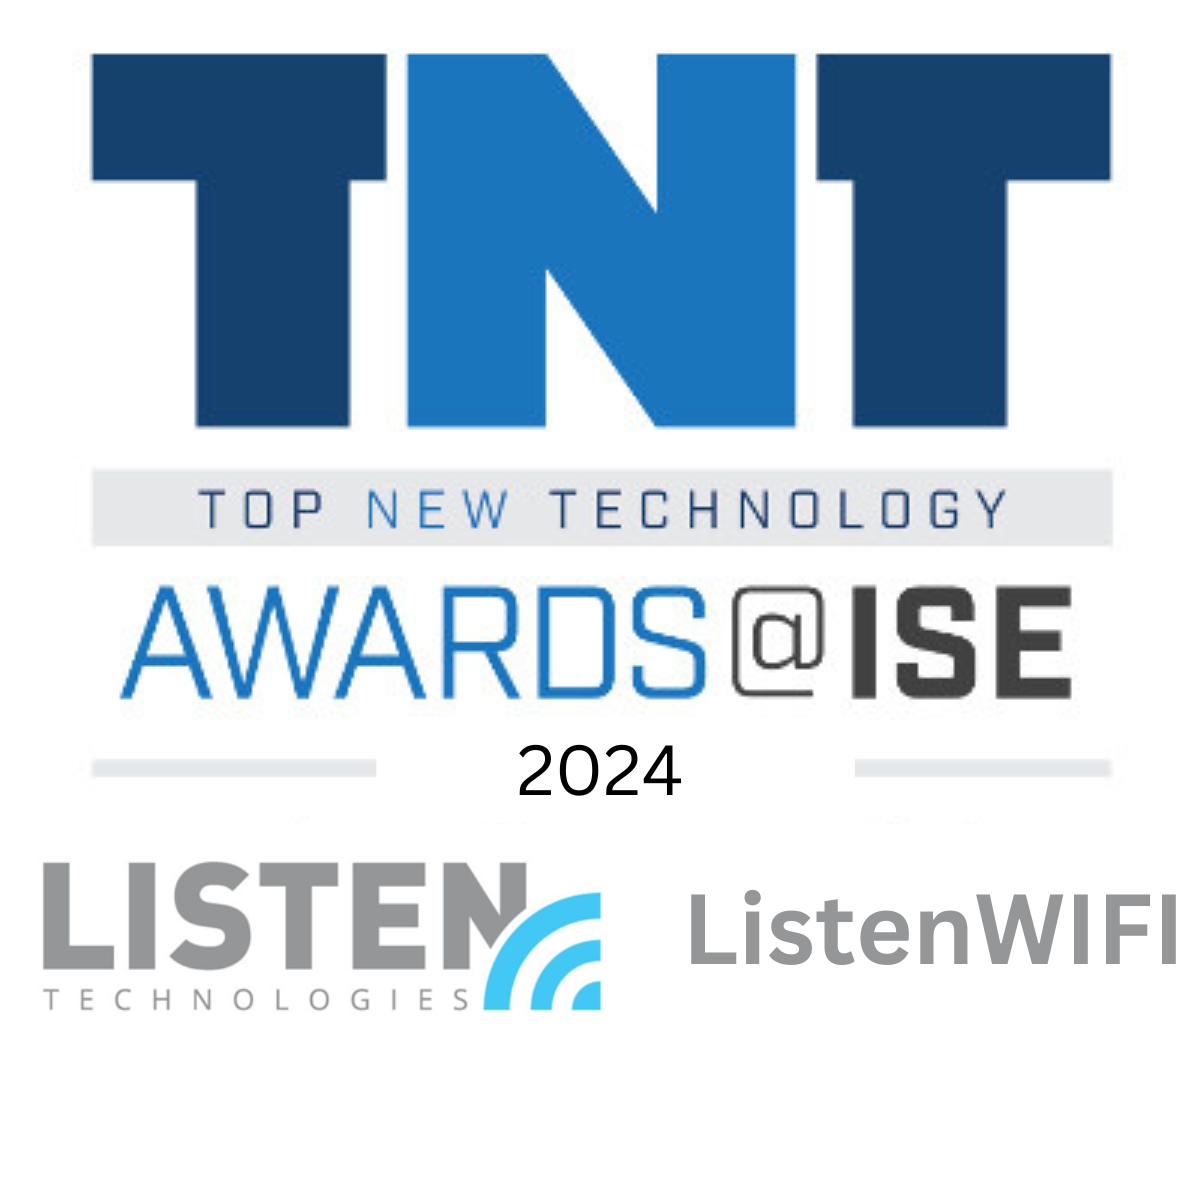 Props & hats off to @ListenTech for taking home a prestigious TNT Award at ISE 2024 in Barcelona! is.gd/shIE75 More info? is.gd/XNorMo or contact our office. #ise2024 #tntawards #listentech #listenwifi #proav #avexperts #avtweeps #wepowerperformance